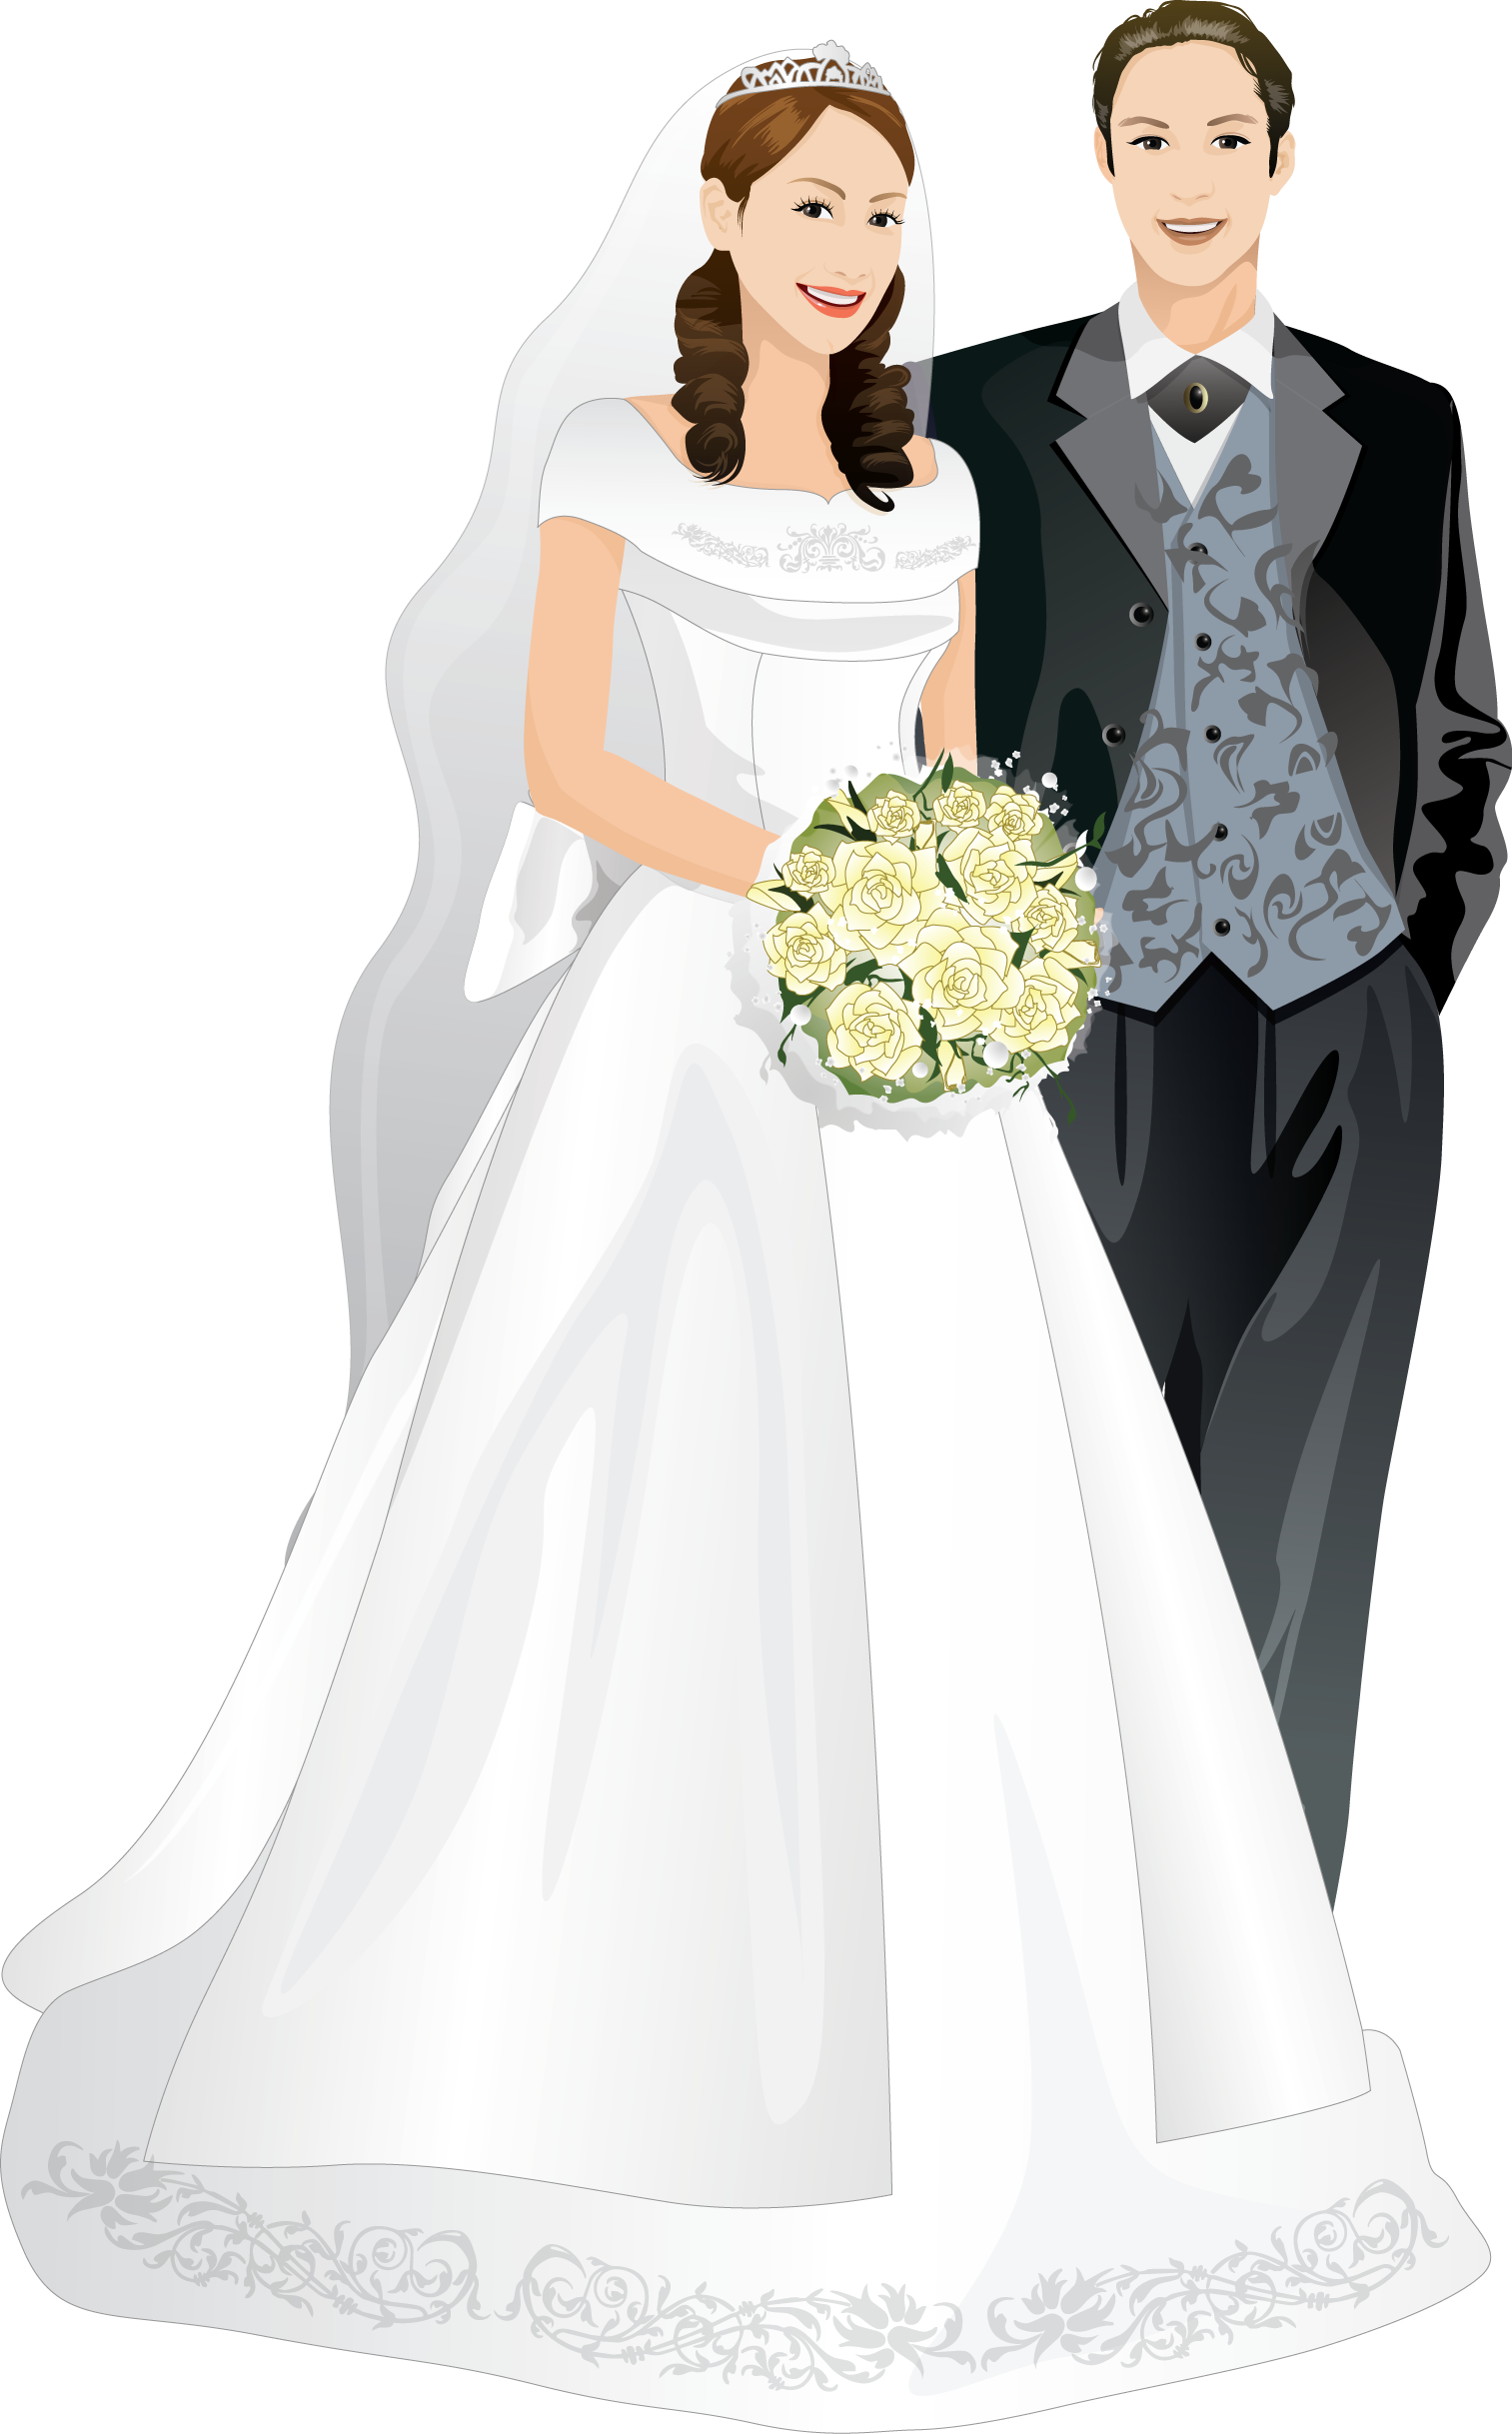 A Bride And Groom In A Wedding Dress